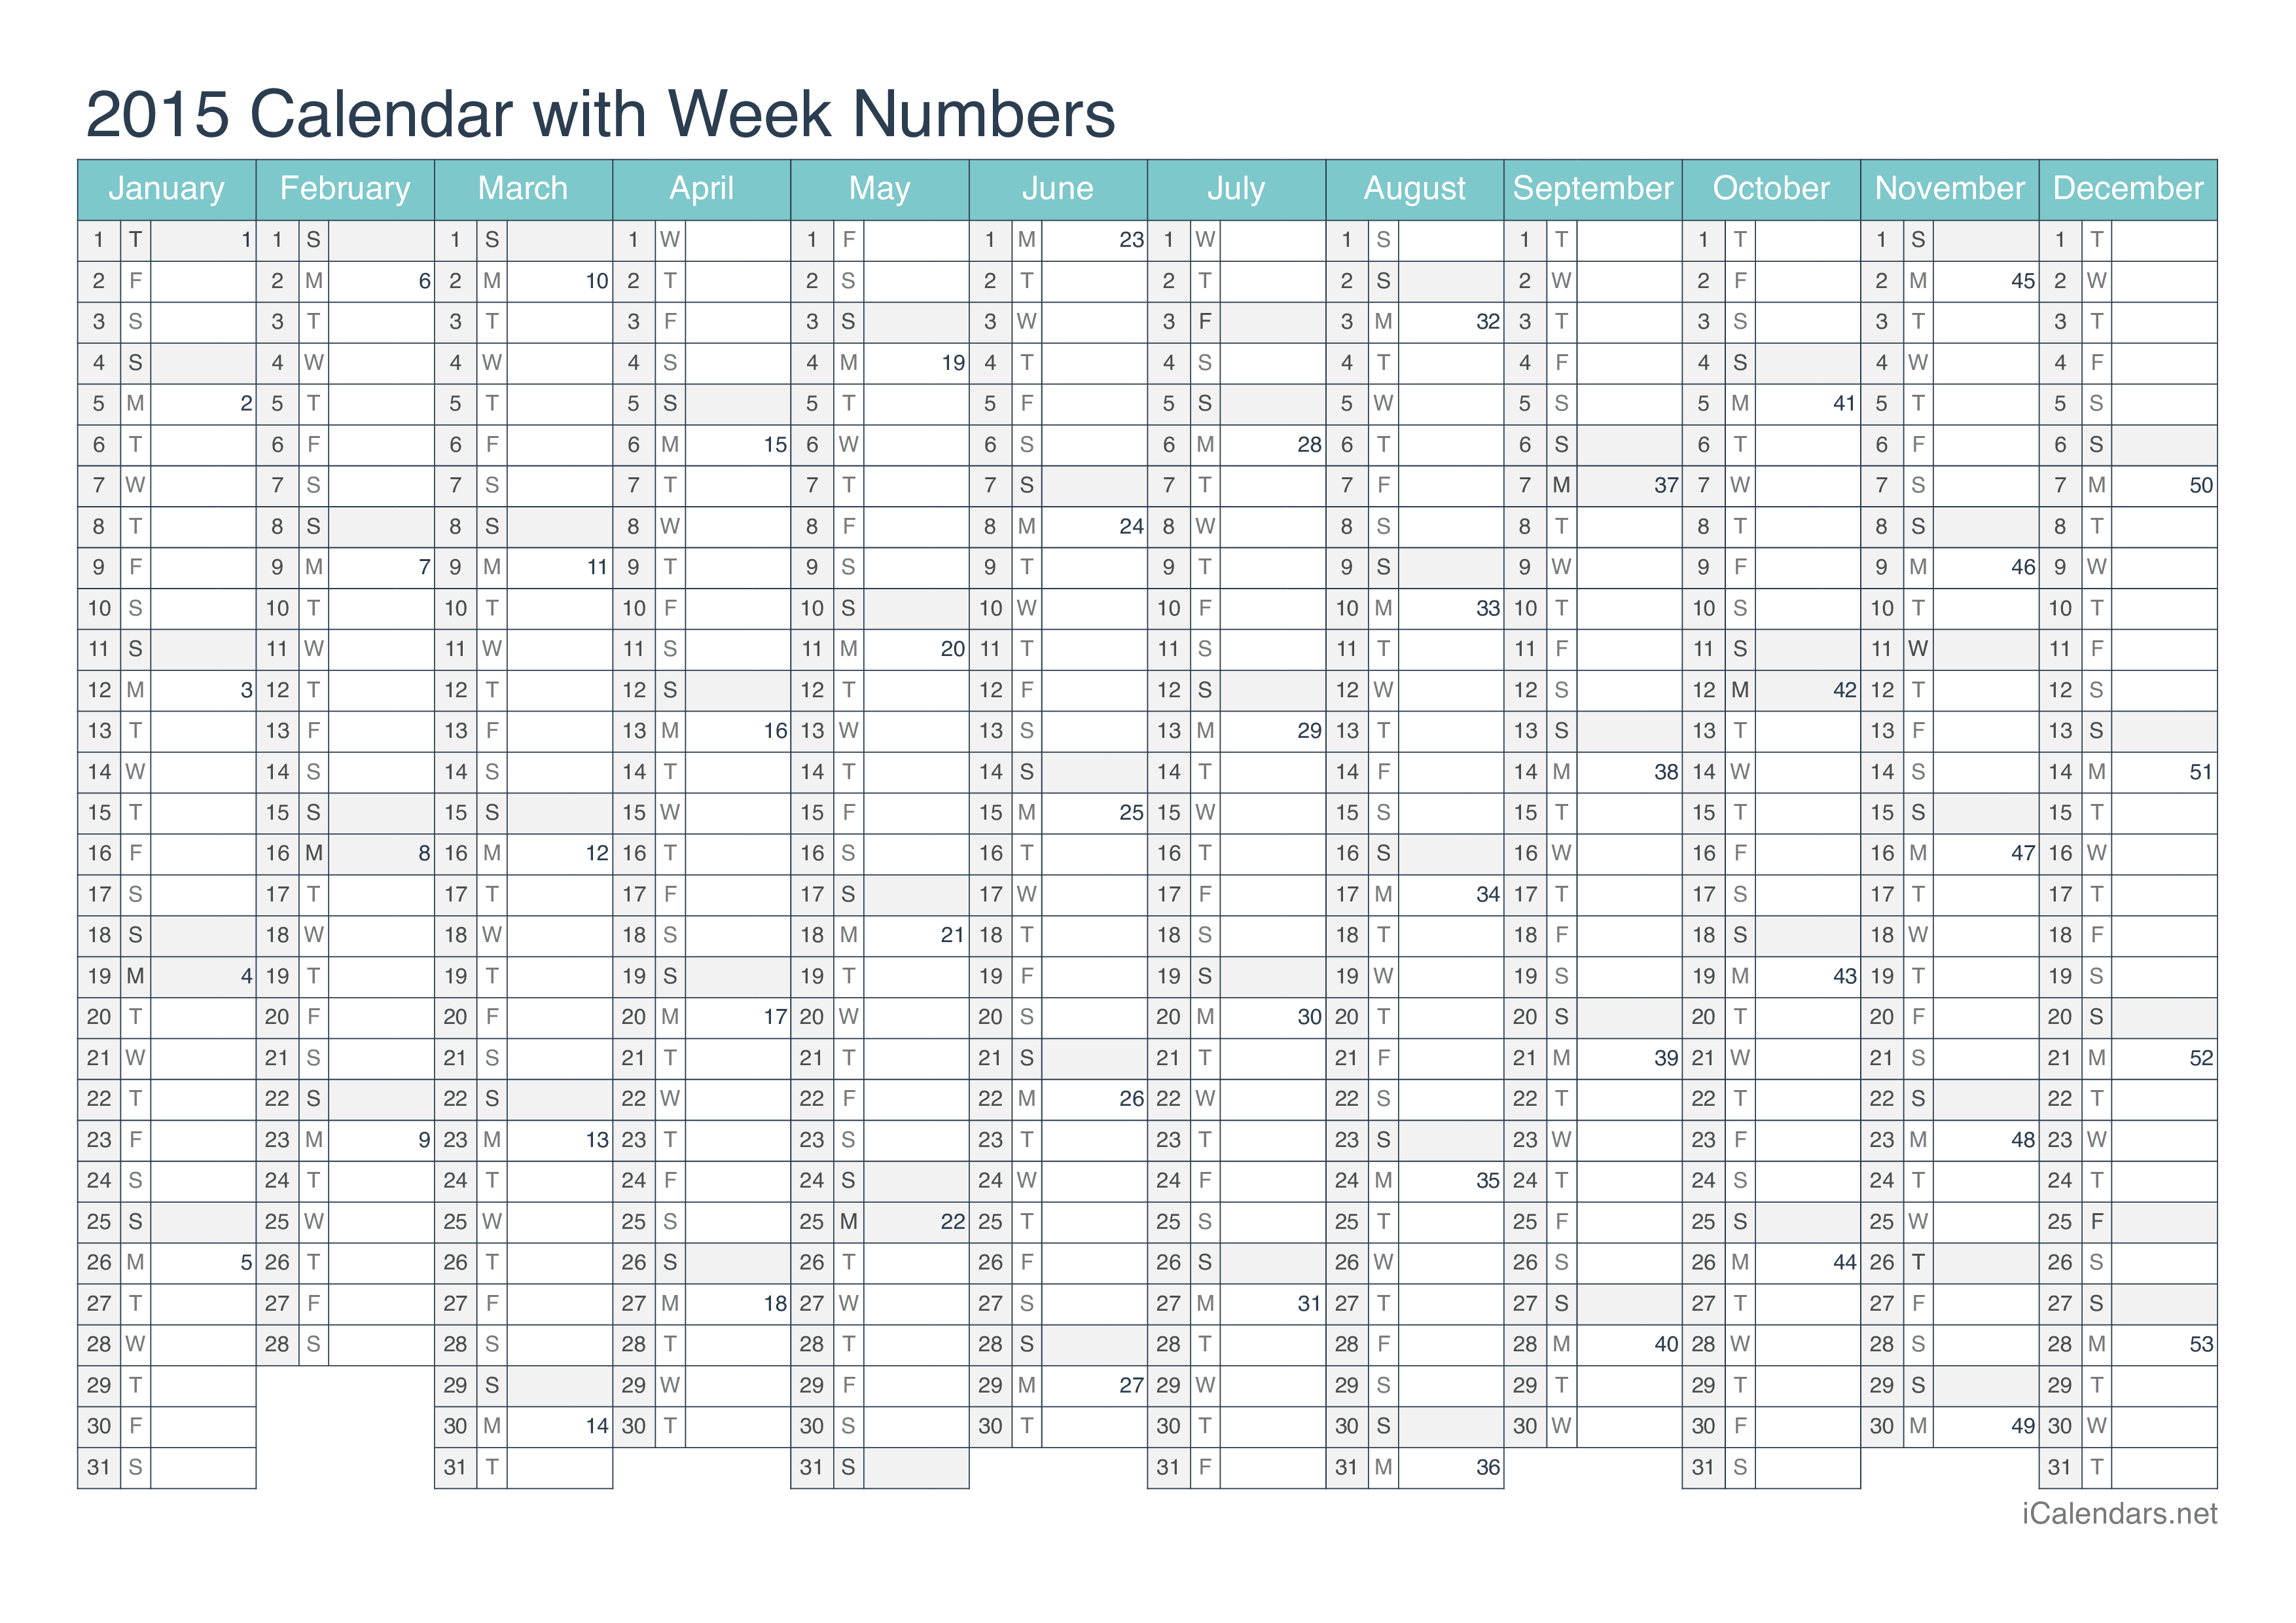 2015 Calendar with week numbers - Turquoise